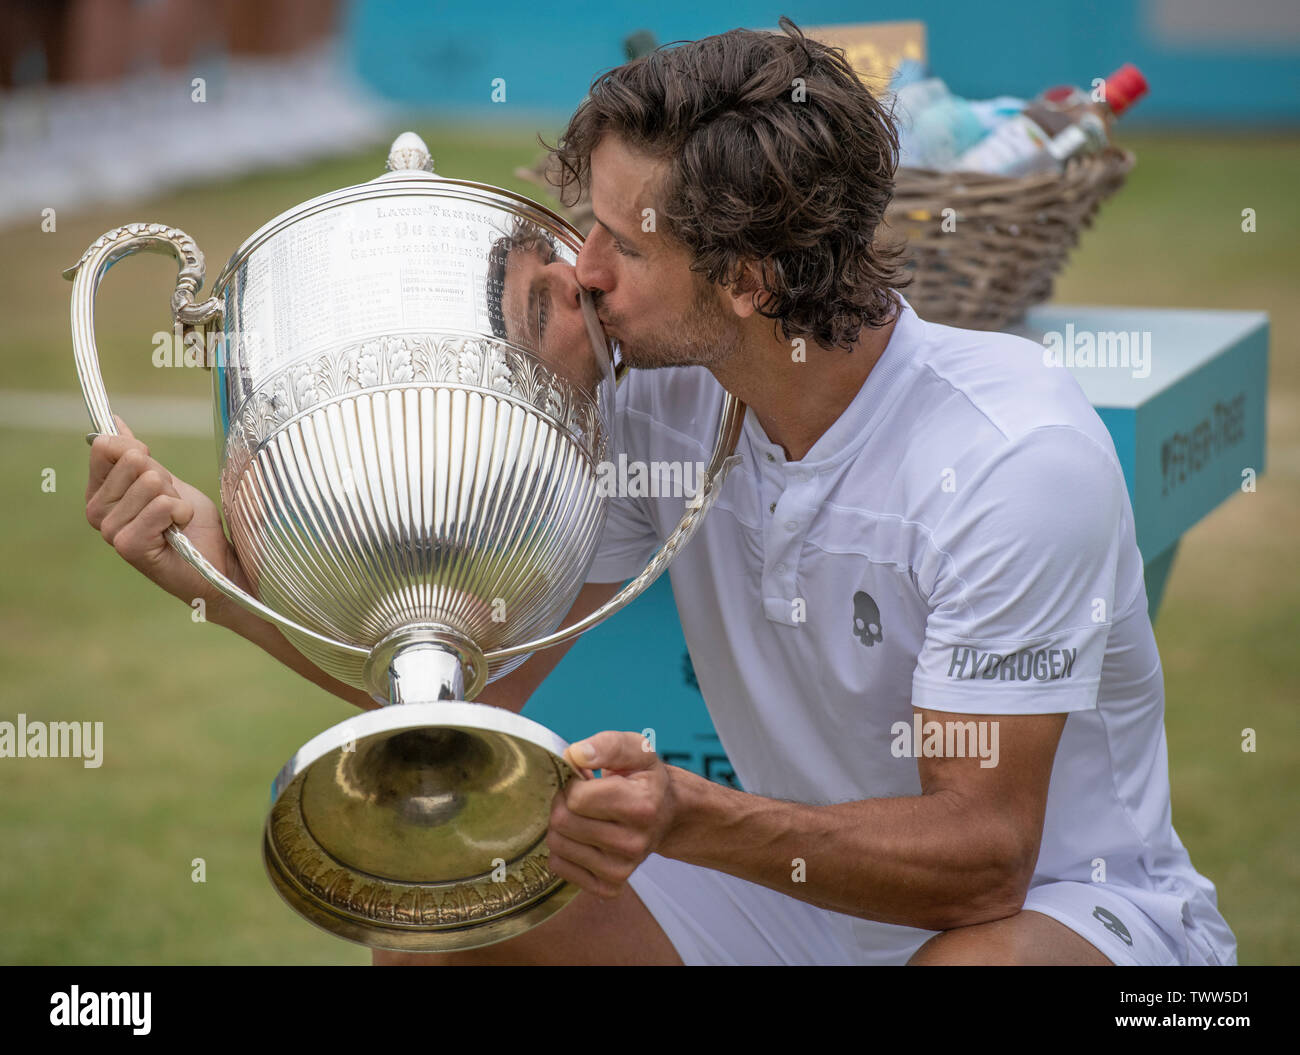 The Queens Club, London, UK. 23rd June 2019. Day 7 of The Fever Tree Championships. Feliciano Lopez (ESP) vs Gilles Simon (FRA) in the Singles Final, Lopez takes the trophy Credit: Malcolm Park/Alamy Live News. Stock Photo